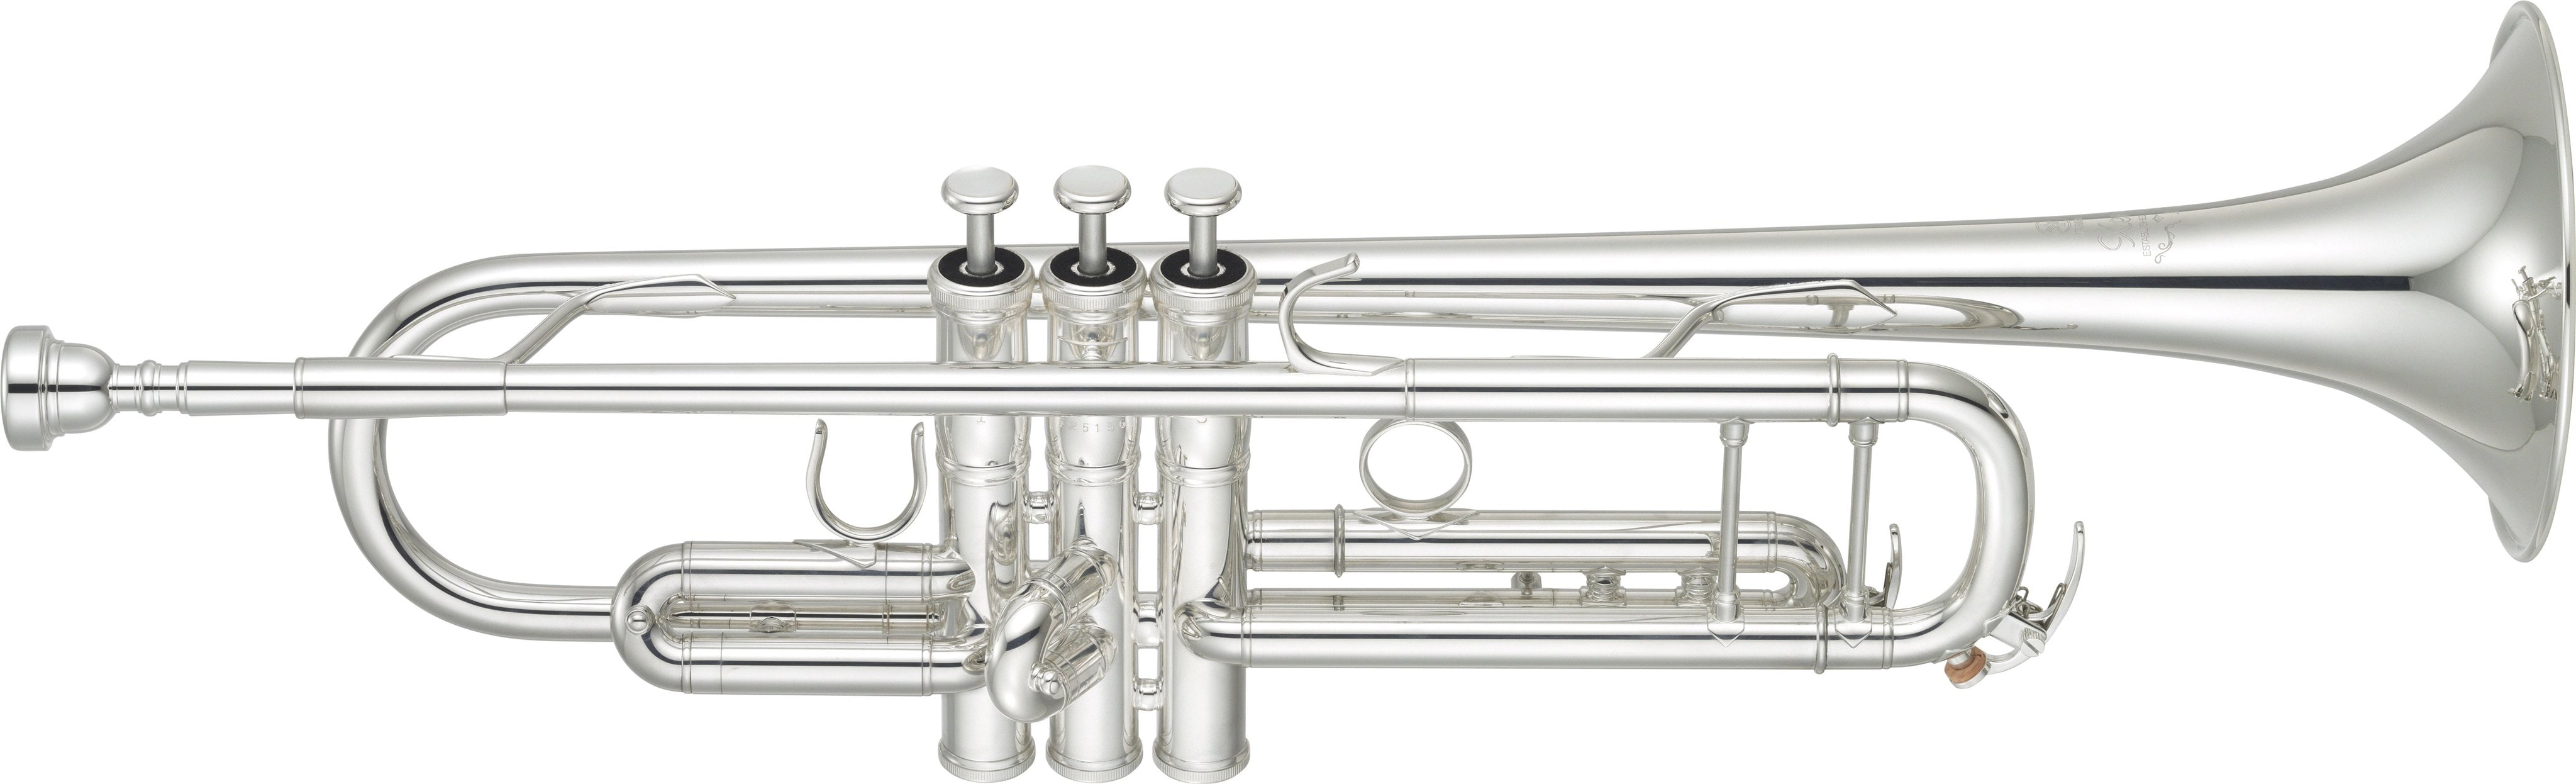 YTR-8335S - Overview - Bb Trumpets - Trumpets - Brass & Woodwinds